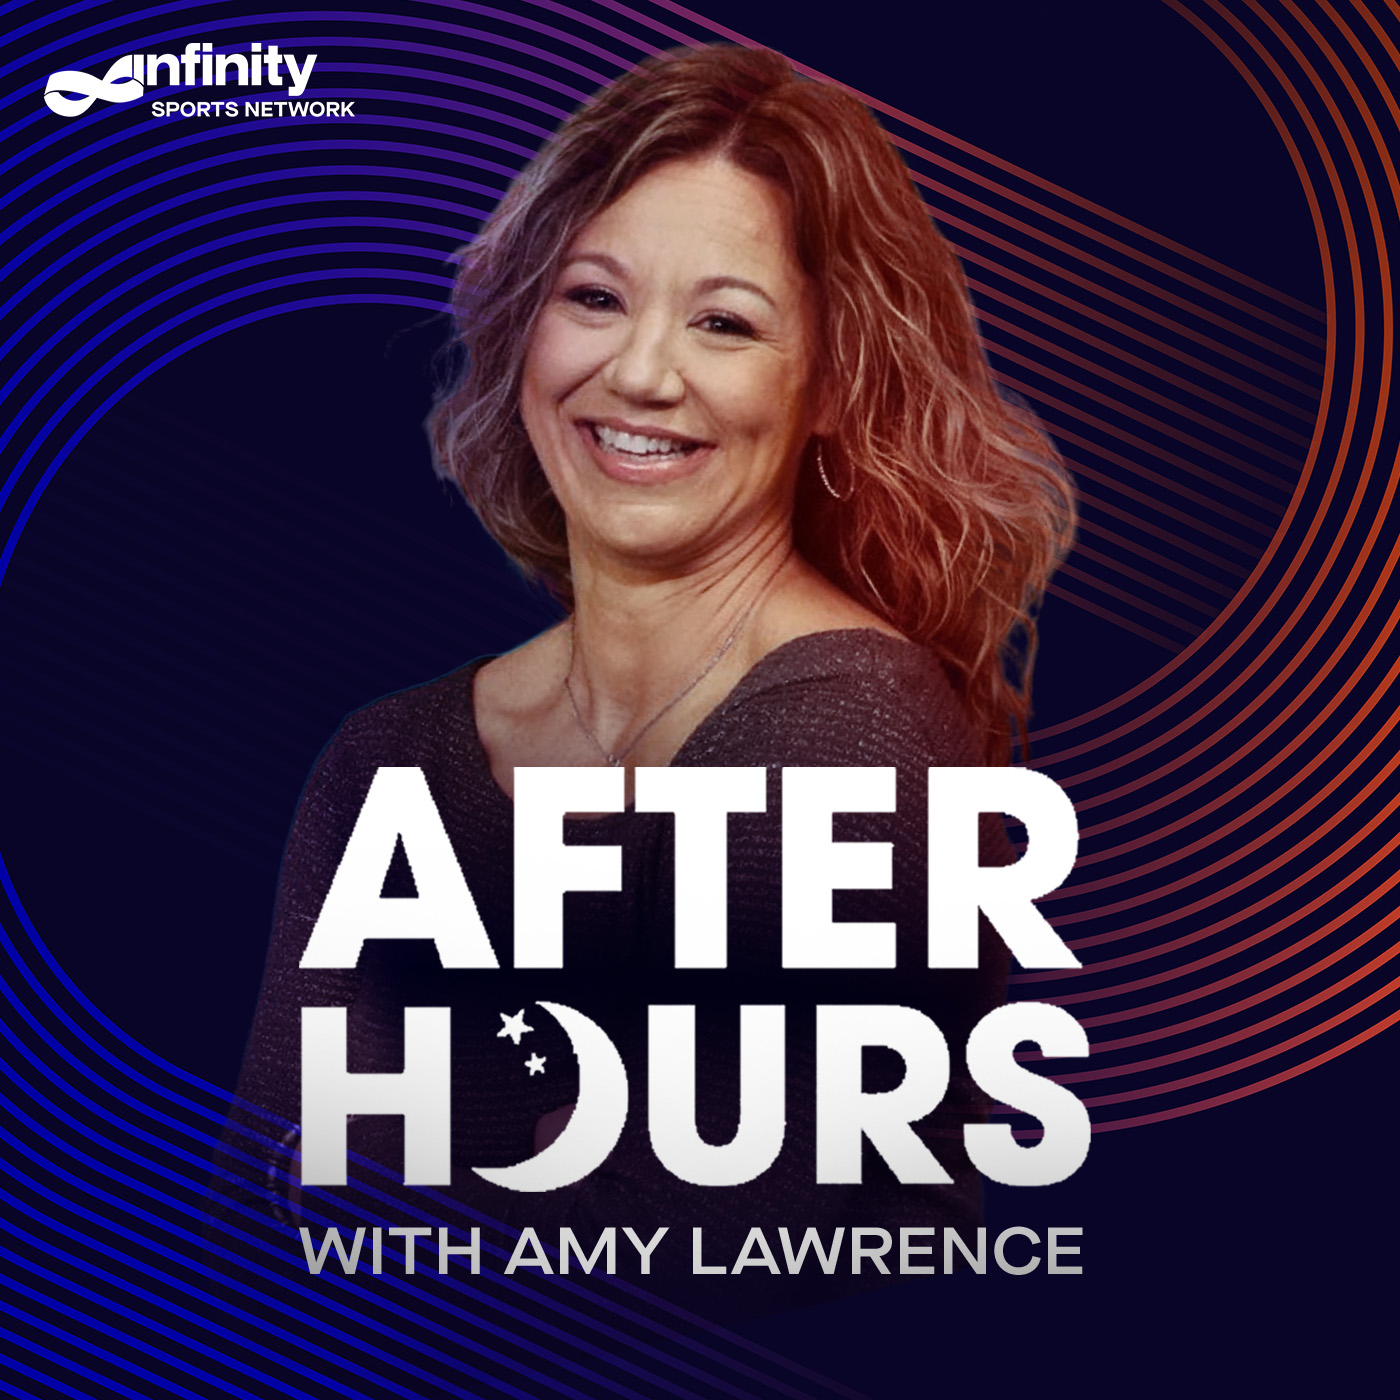 4/30/21 After Hours with Amy Lawrence PODCAST: Hour 3